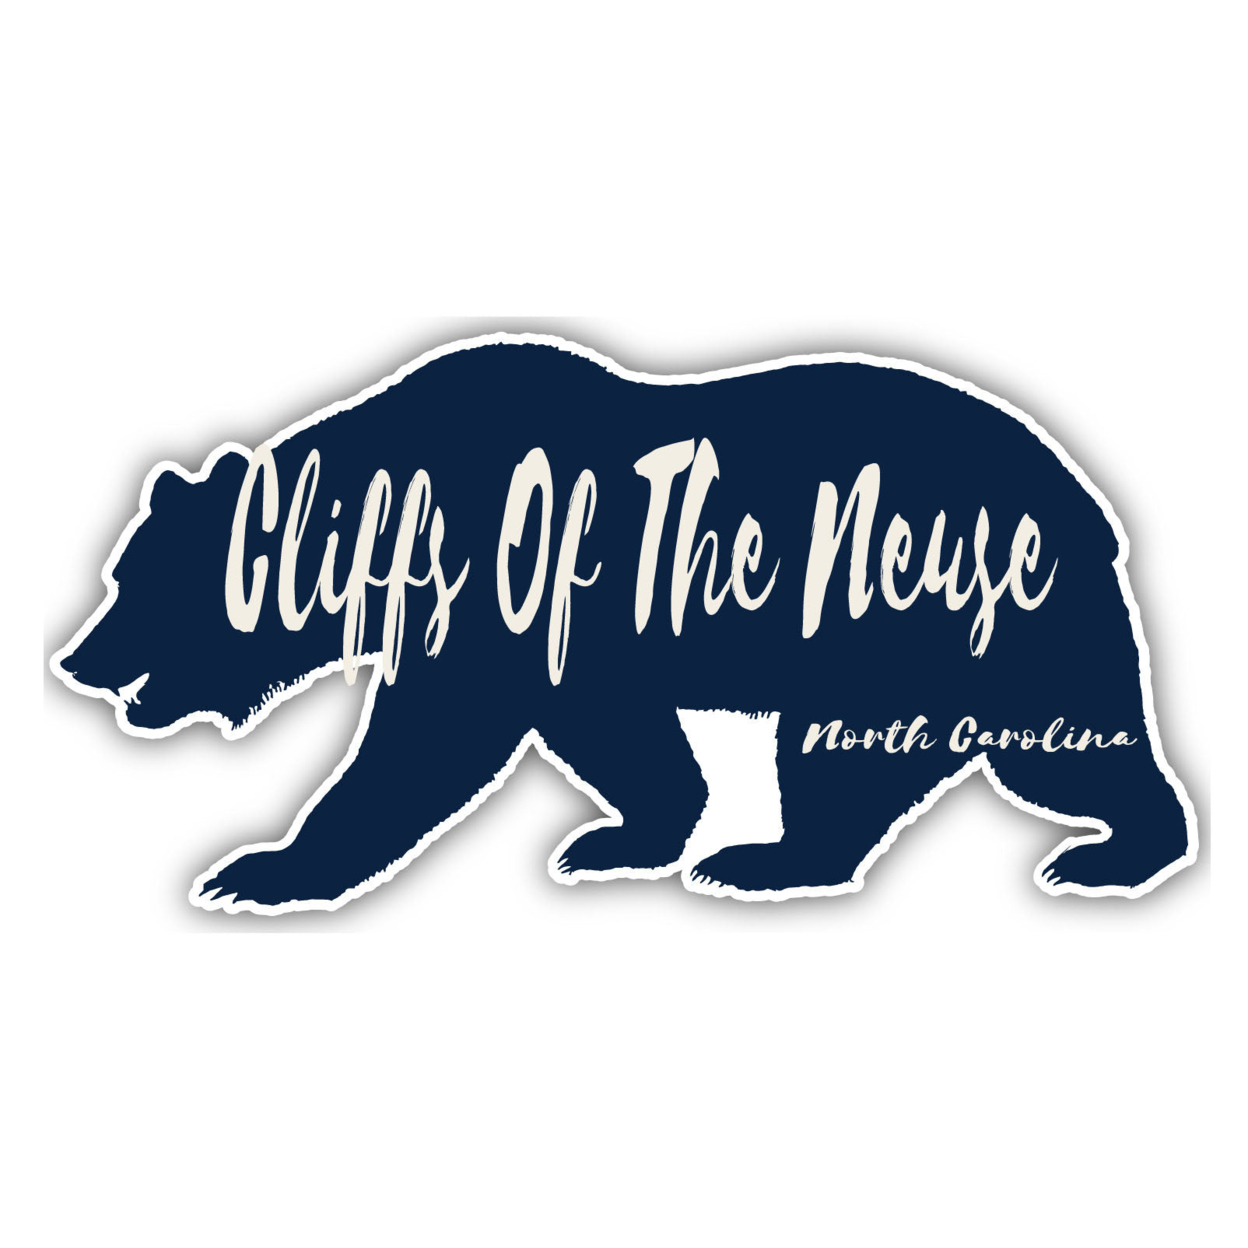 Cliffs Of The Neuse North Carolina Souvenir Decorative Stickers (Choose Theme And Size) - 4-Pack, 2-Inch, Bear